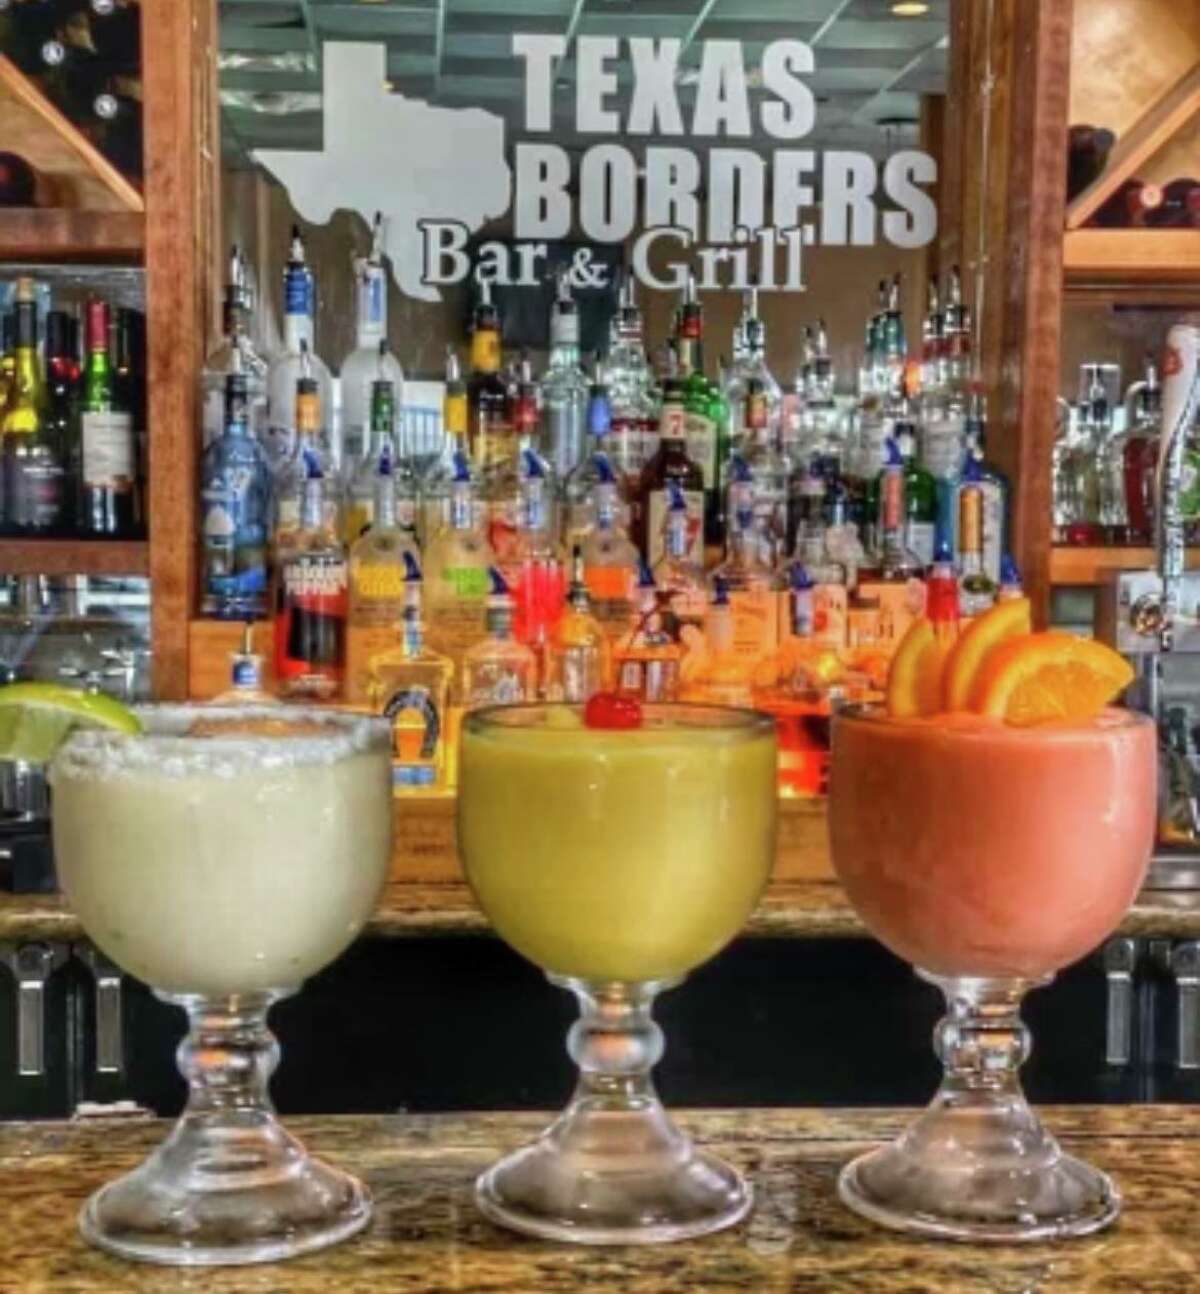 Texas Borders Bar & Grill has been a part of the Katy community for 25 years.